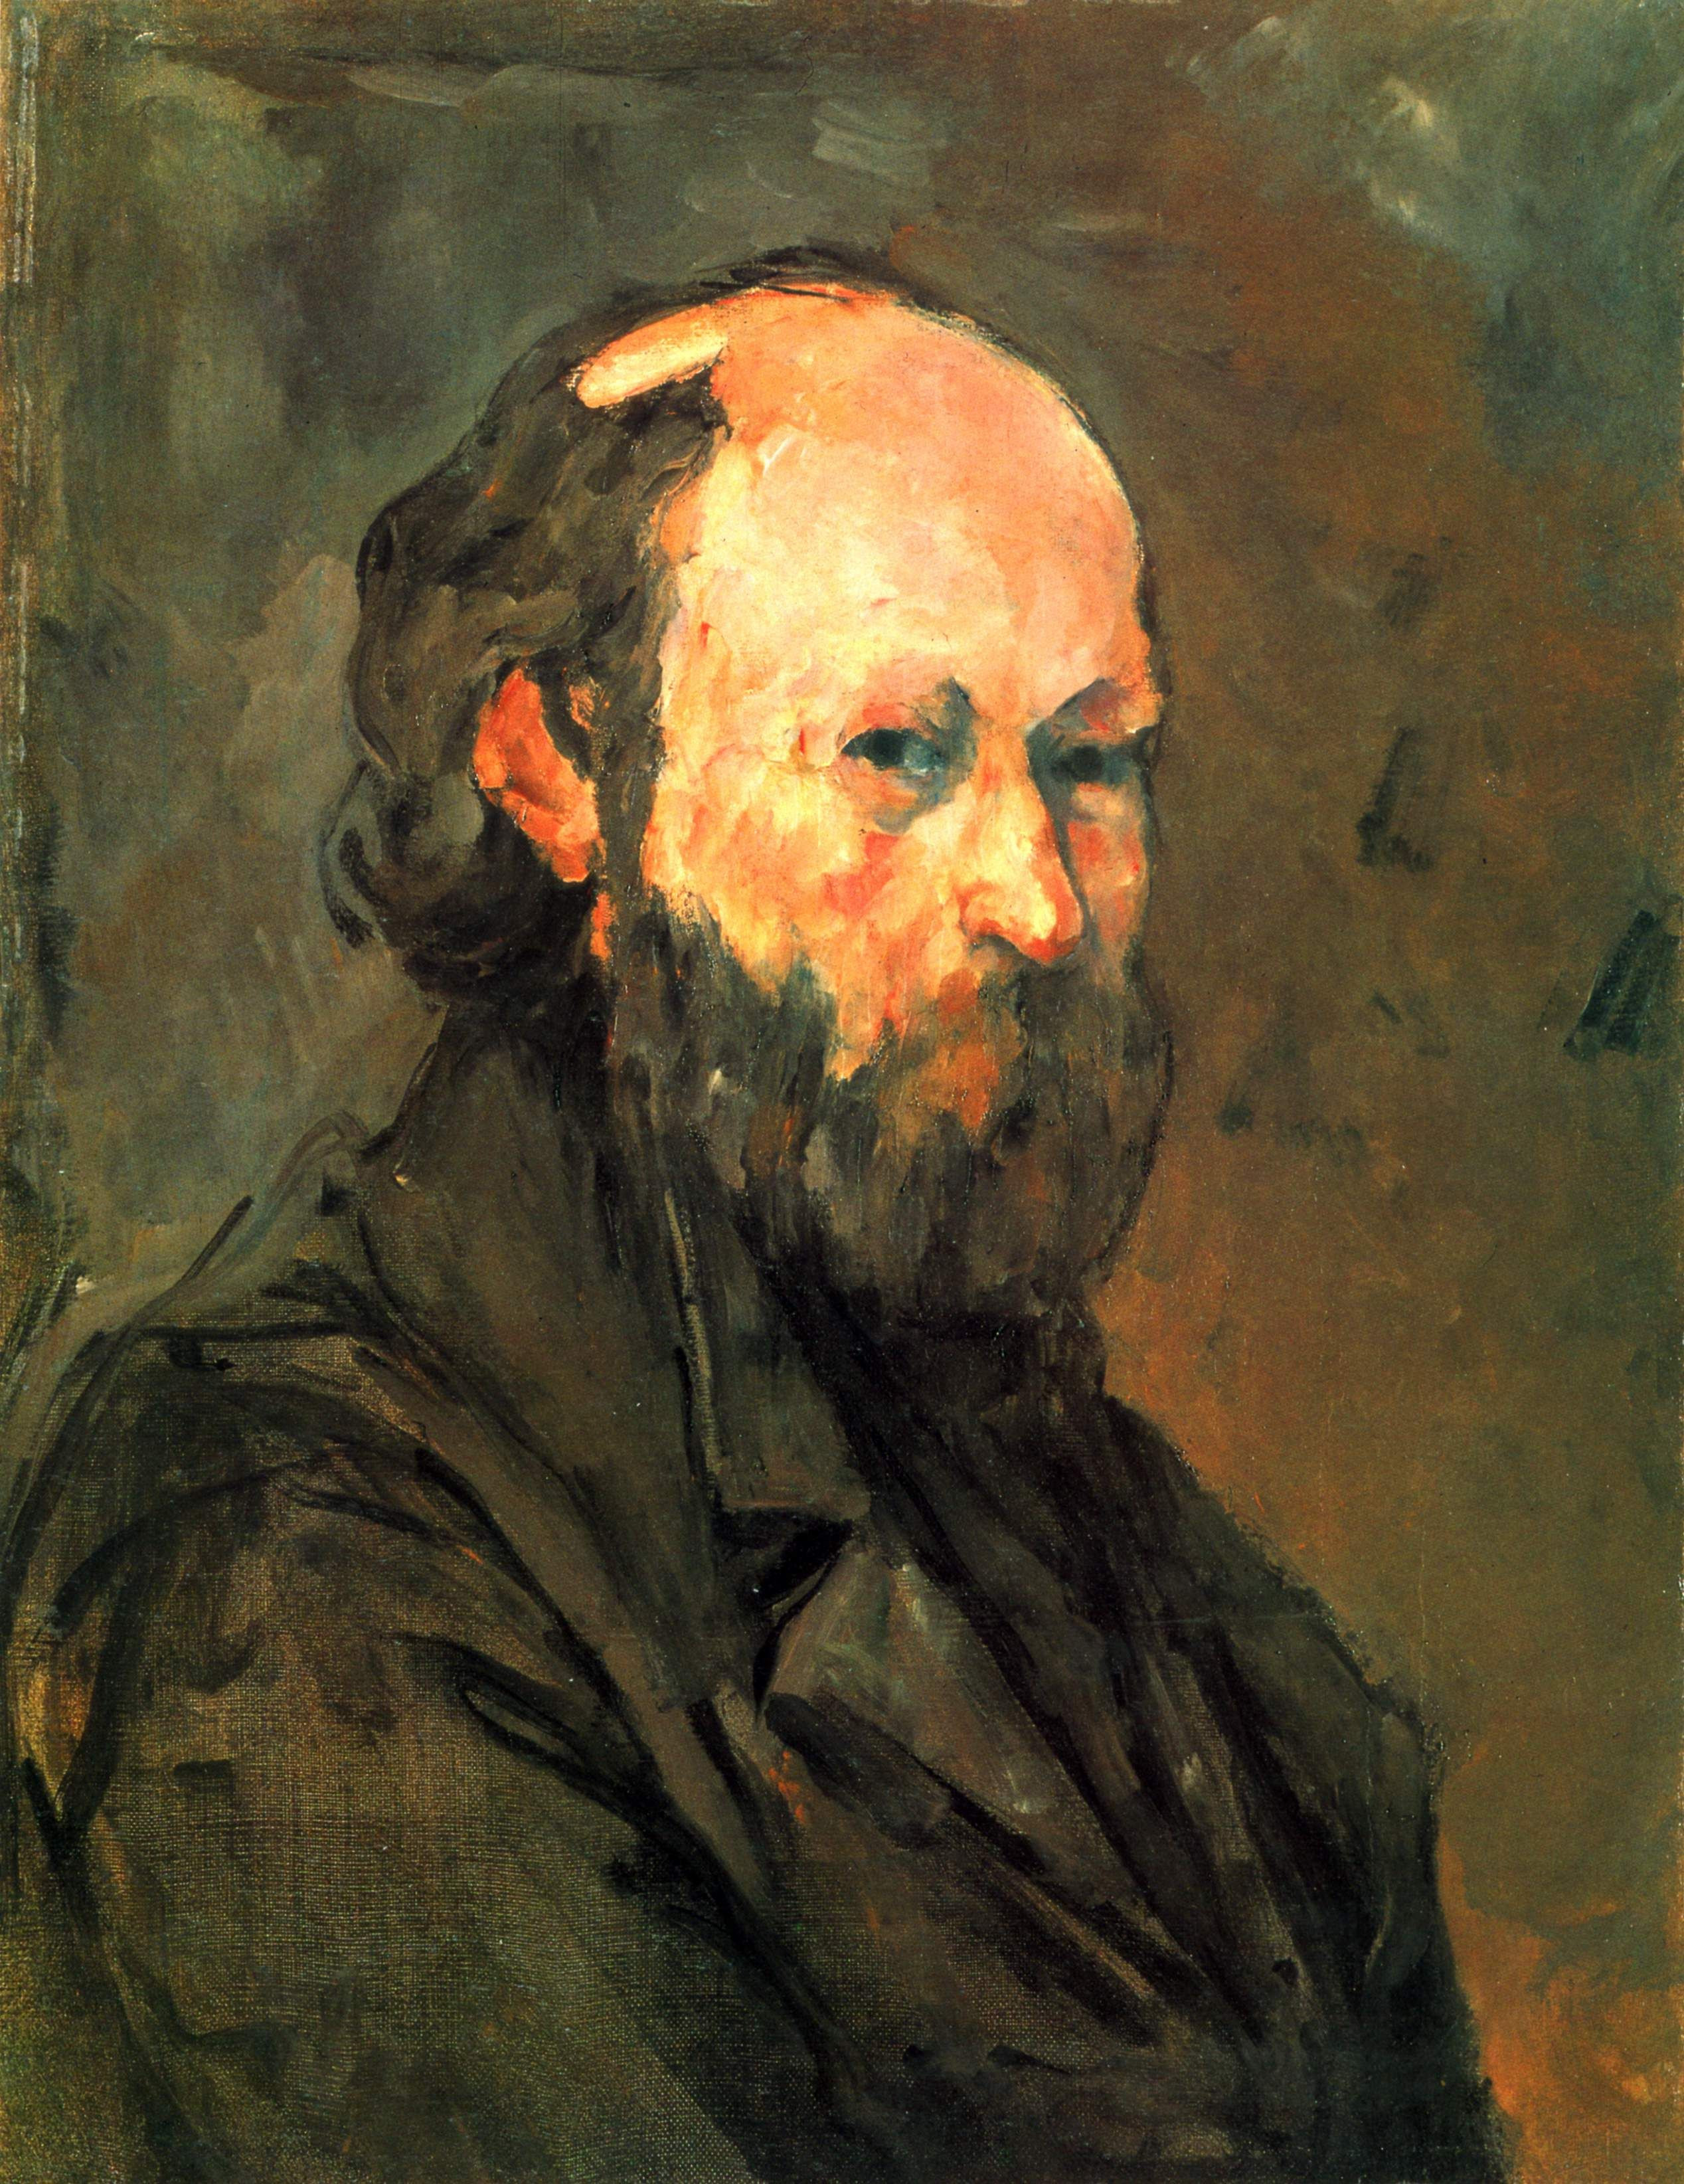 28 attractive the Blue Vase by Paul Cezanne original 2022 free download the blue vase by paul cezanne original of self portrait paul cezanne cazanne paul pinterest paul with self portrait paul cezanne